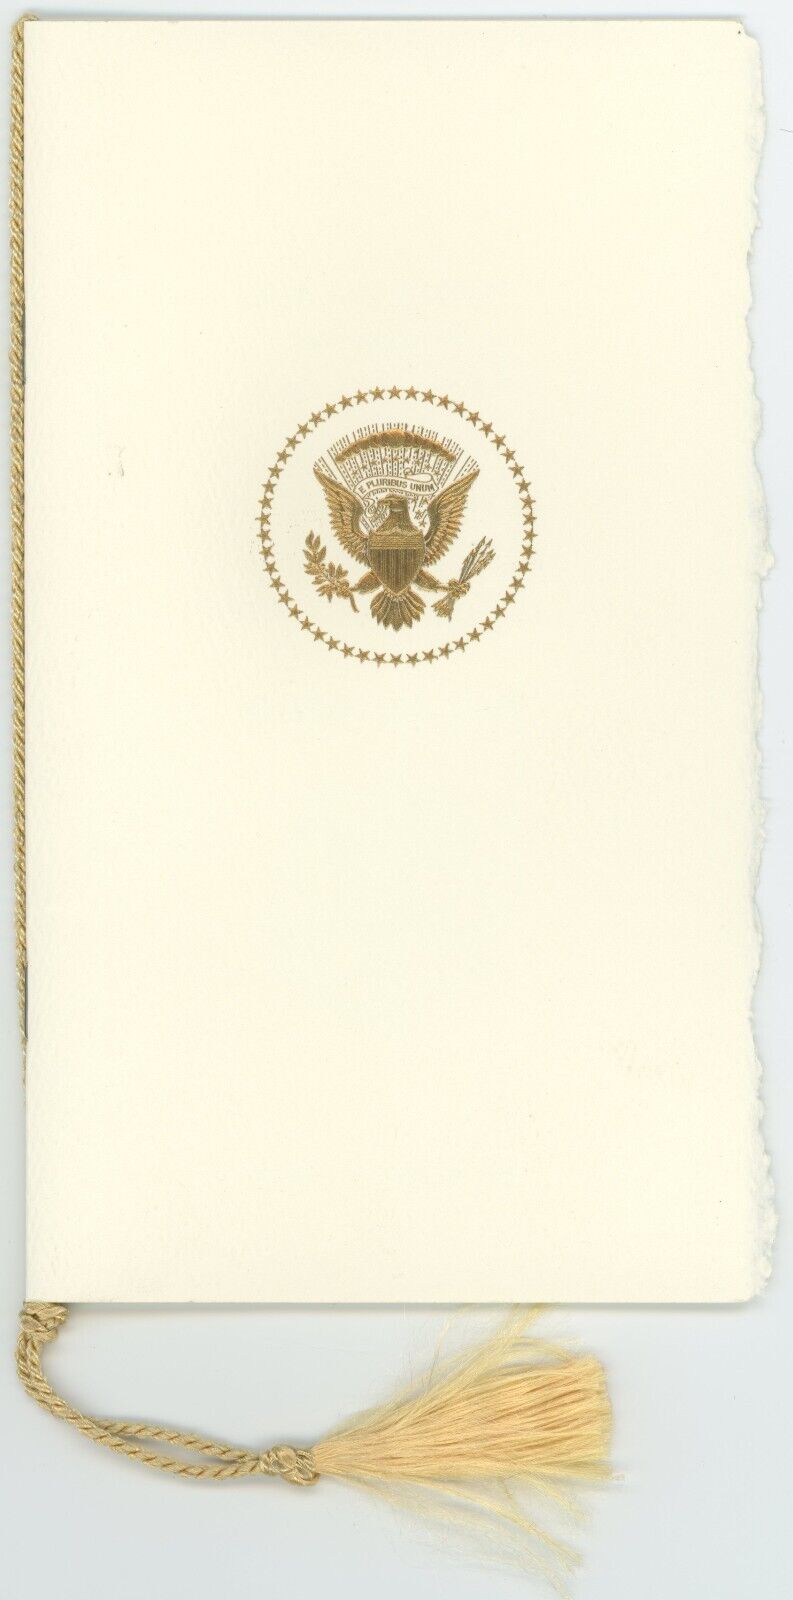 Mariano Rivera Presidential Medal of Freedom White House Program Booklet